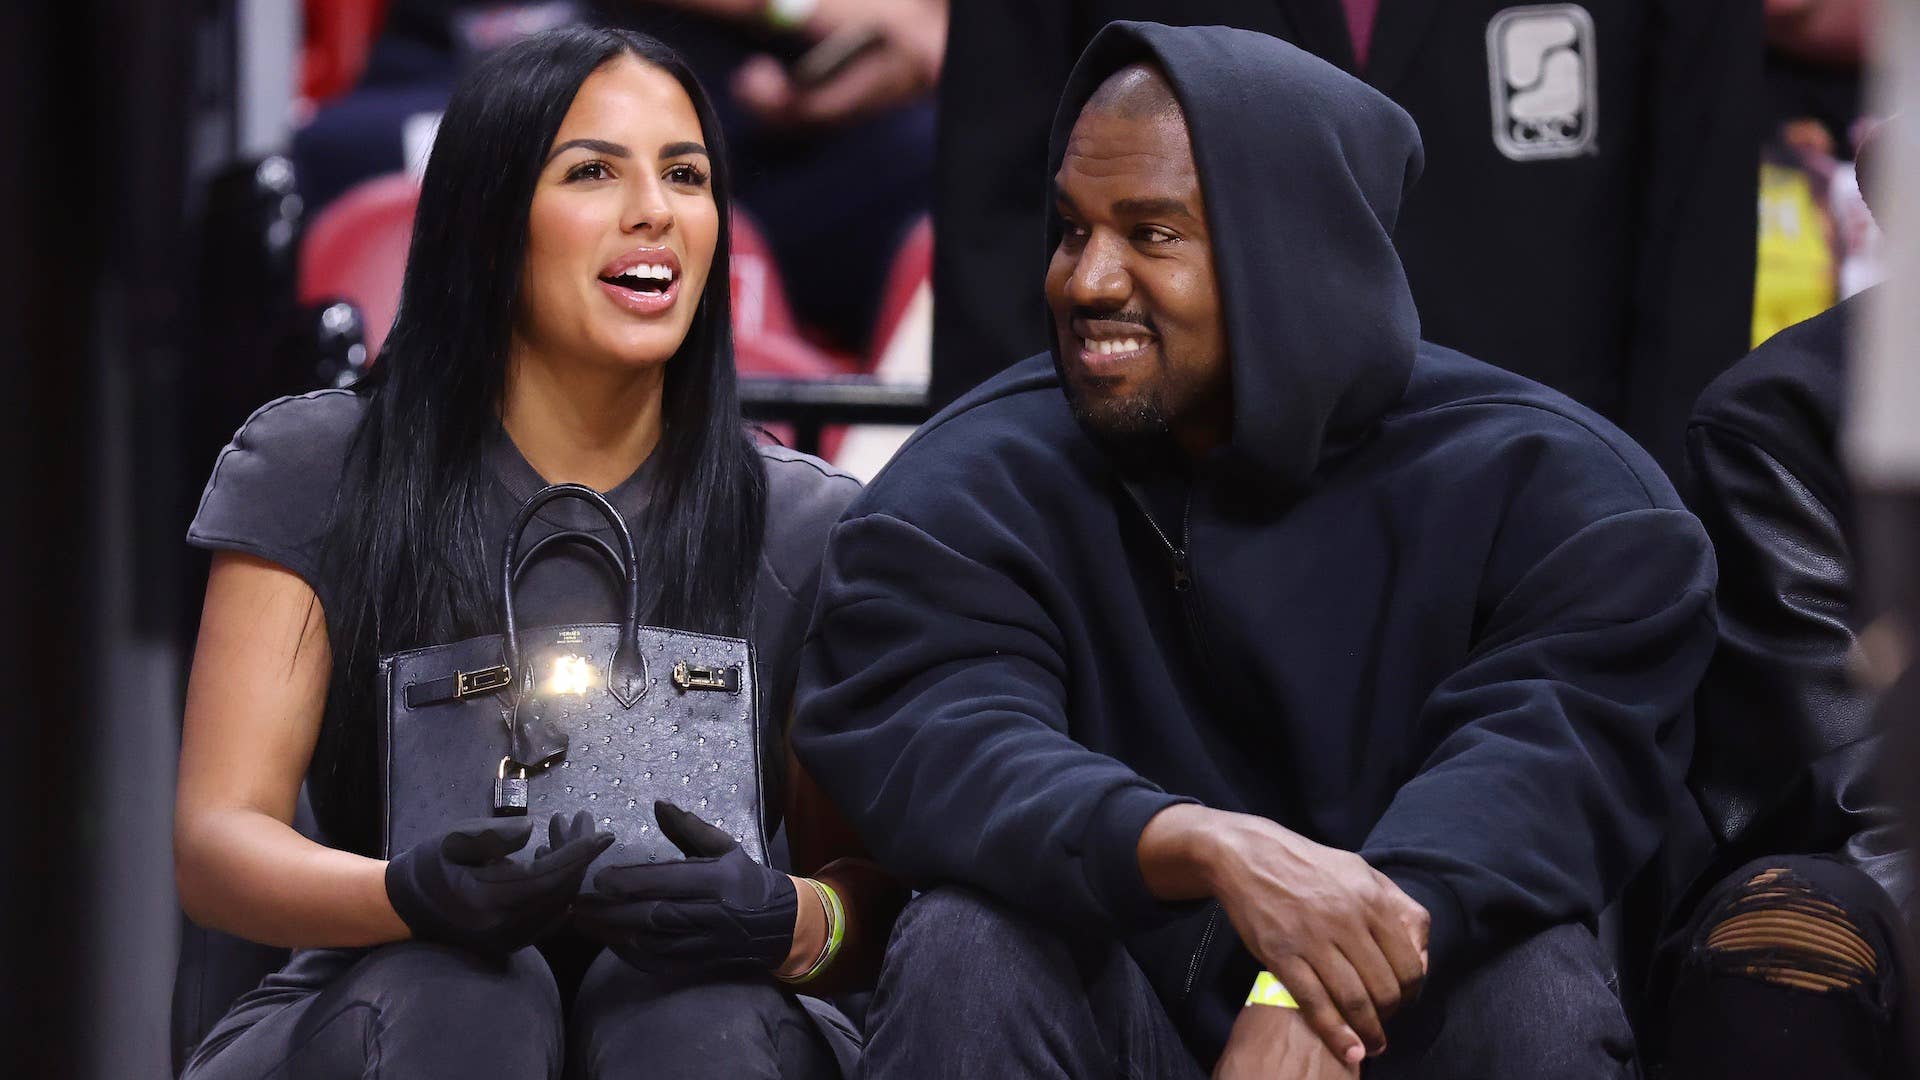 Rapper Kanye West and girlfriend Chaney Jones attend a game between the Miami Heat and the Minnesota Timberwolves